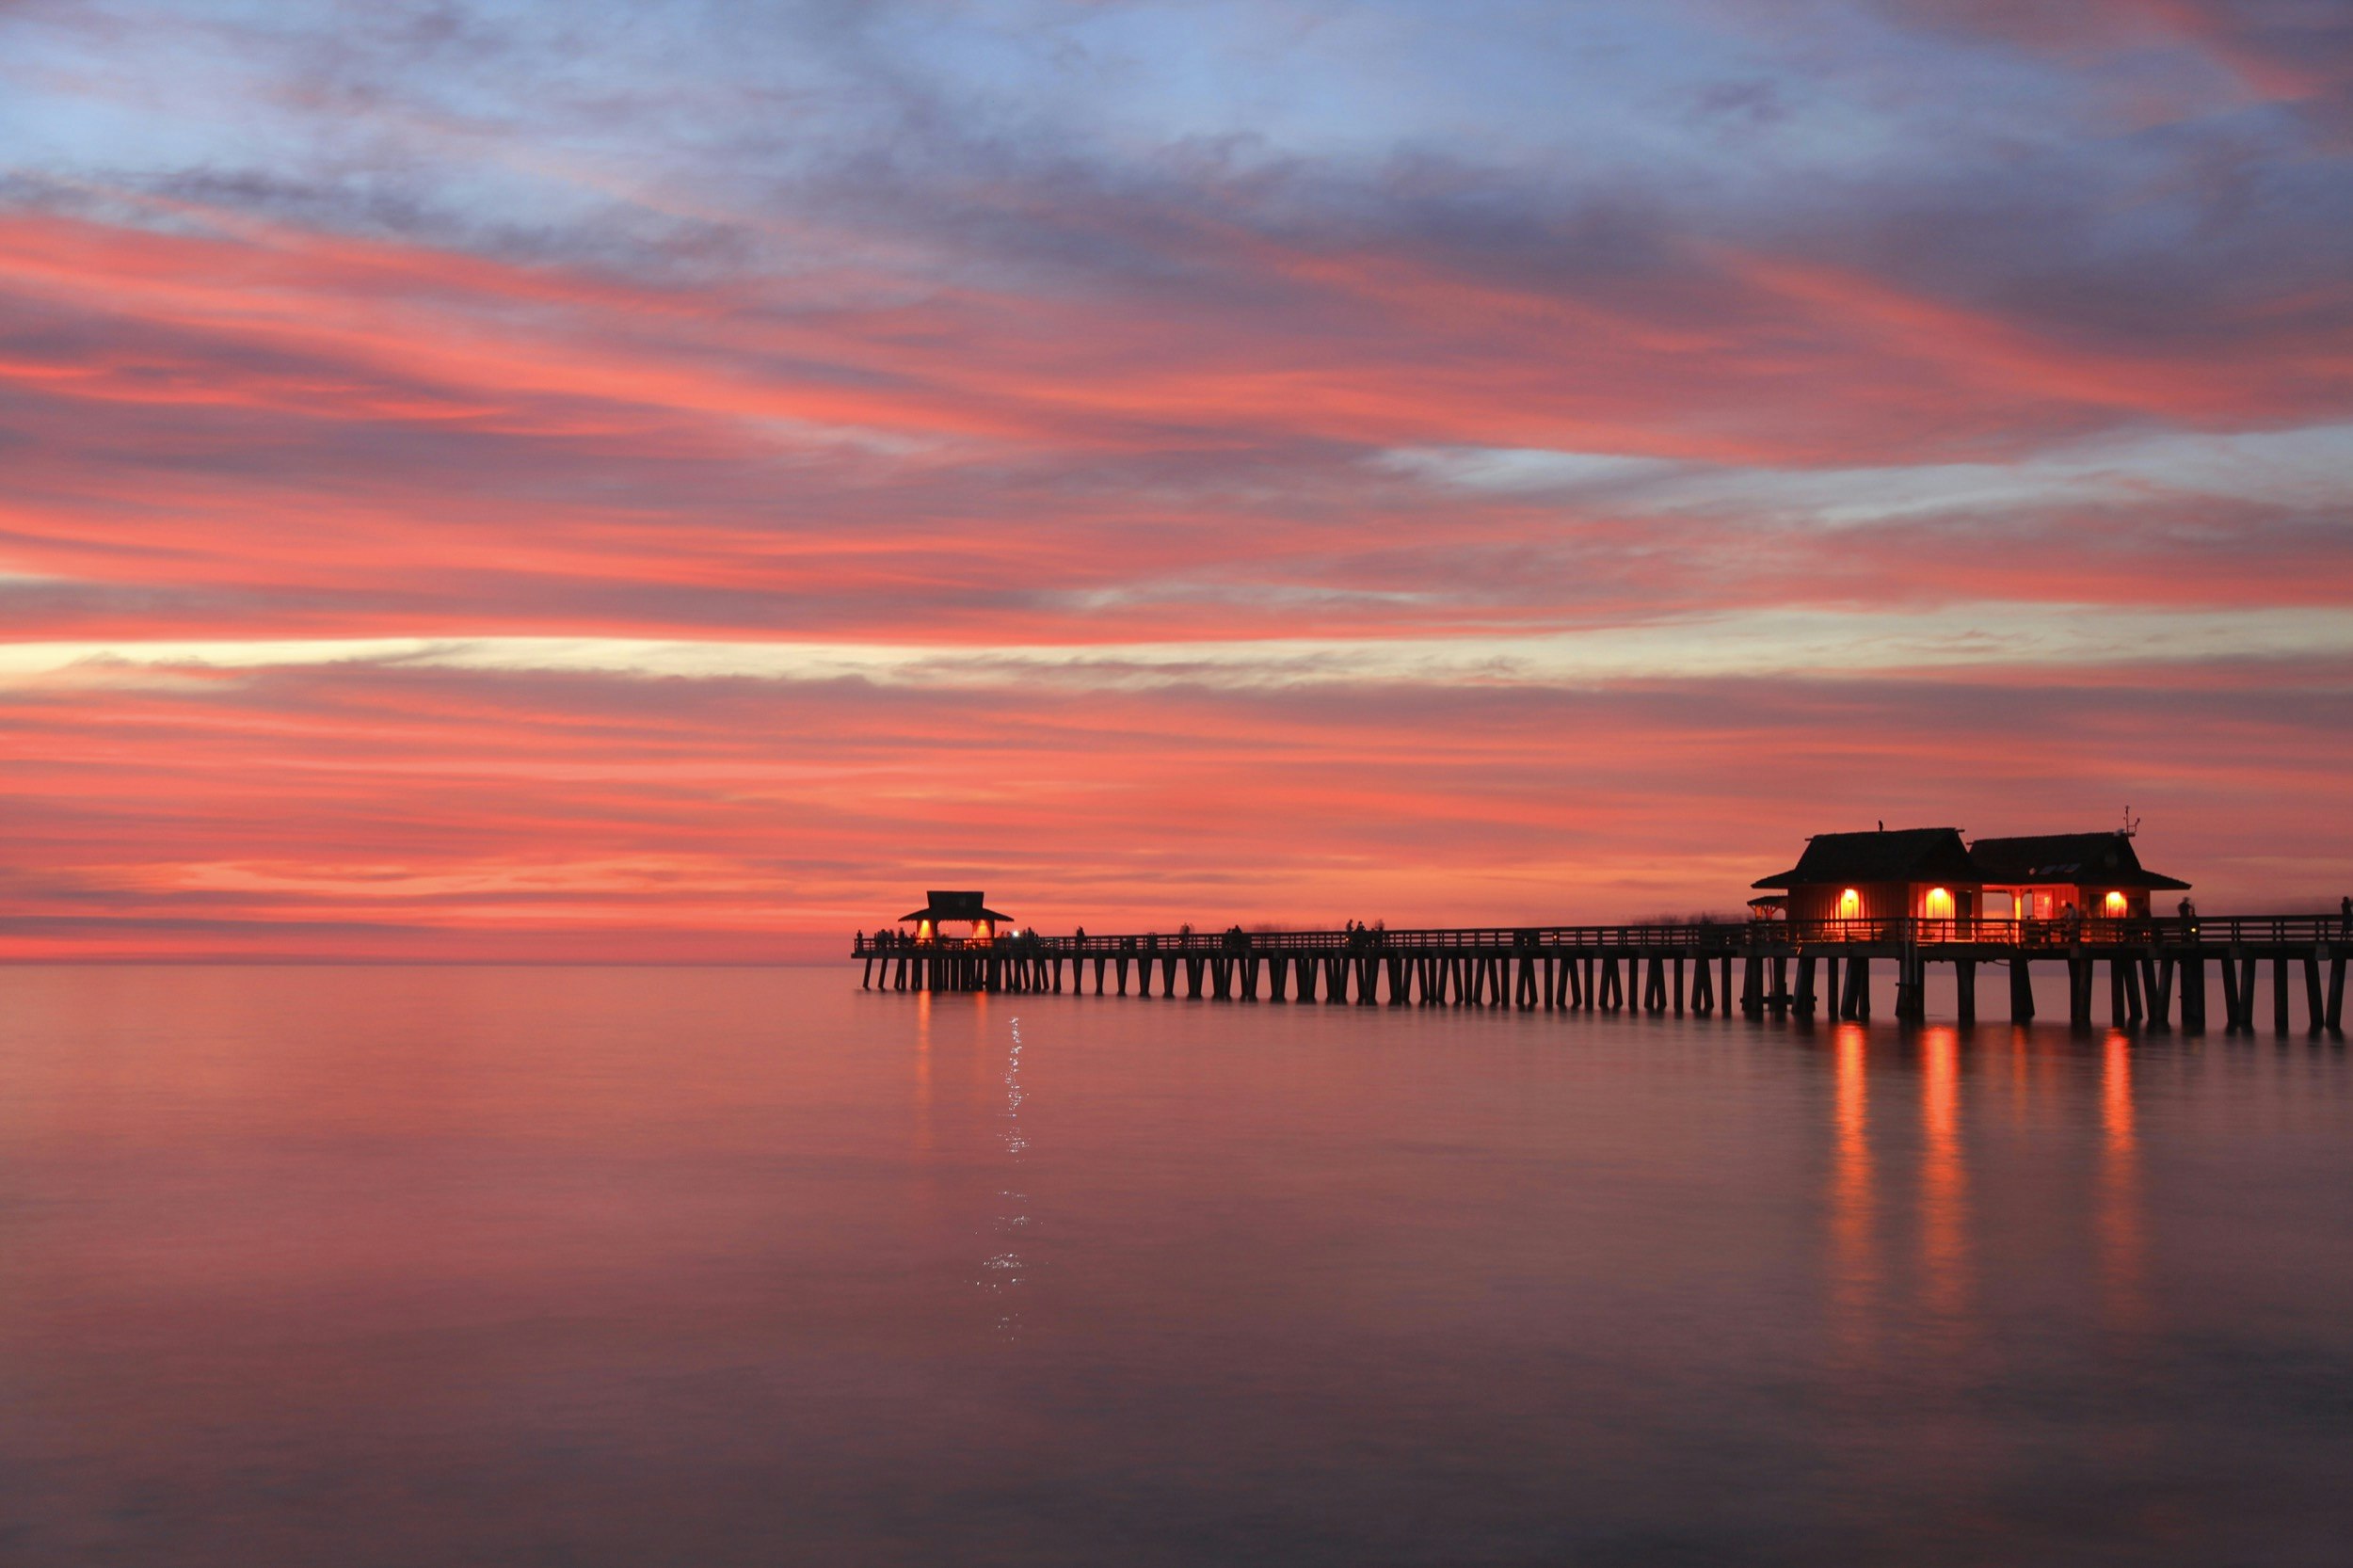 The pier of Naples, Florida is seen at sunset on a calm sea